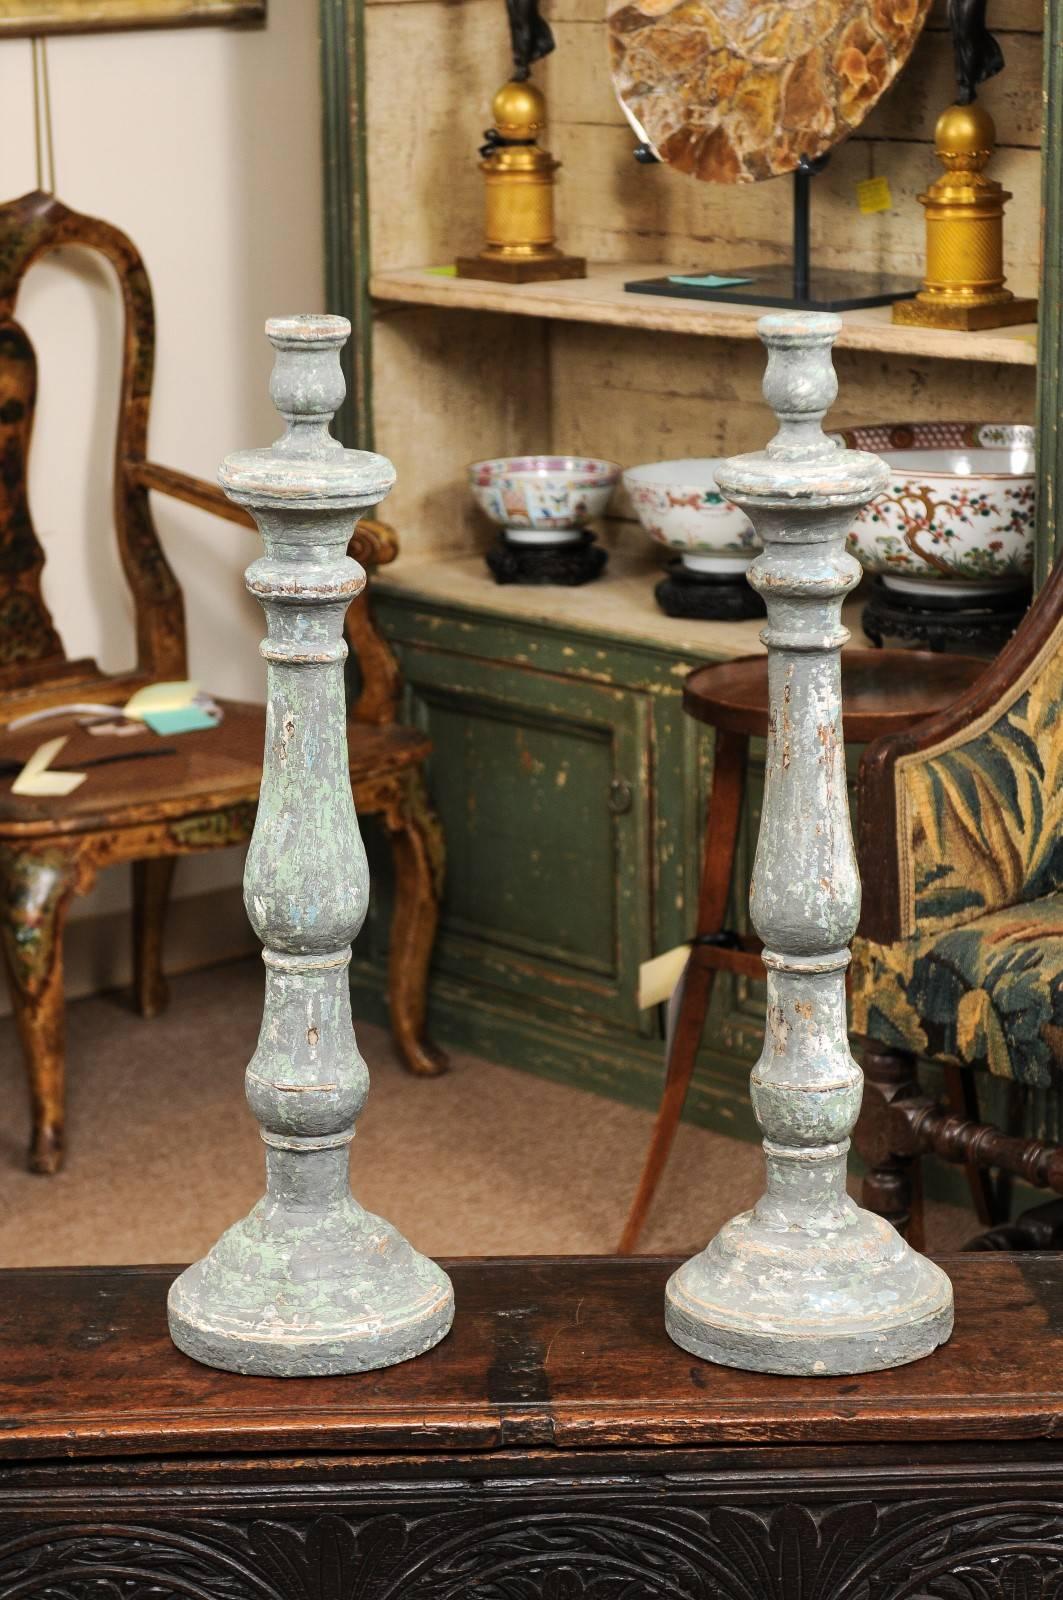 Pair of tall 19th century Italian carved wood candlesticks / altar sticks in distressed blue painted finish.